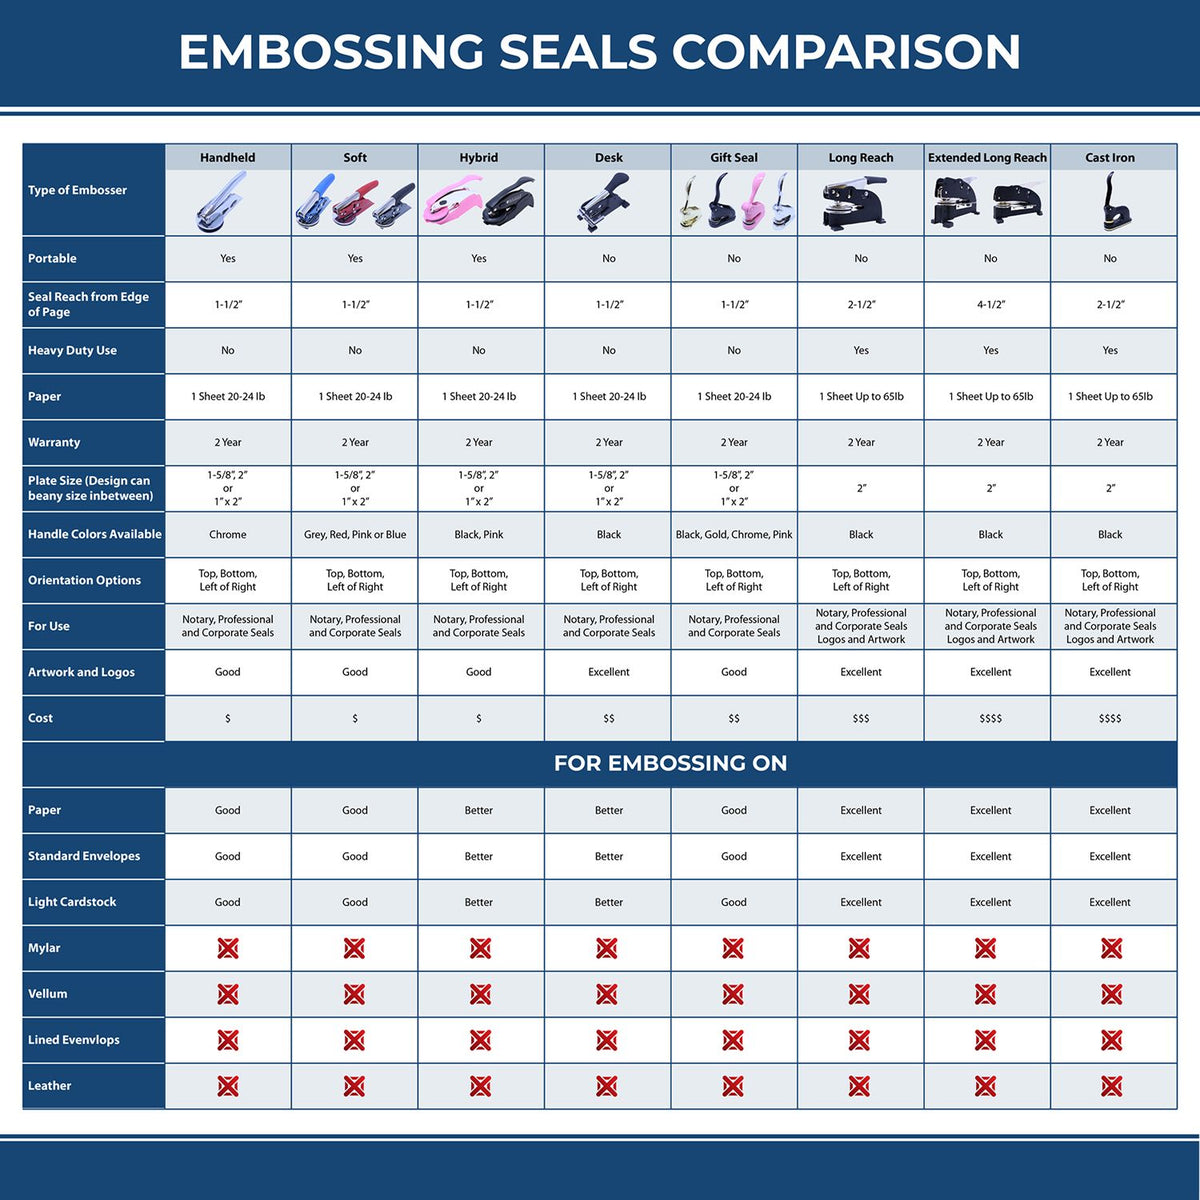 A comparison chart for the different types of mount models available for the Soft Delaware Professional Geologist Seal